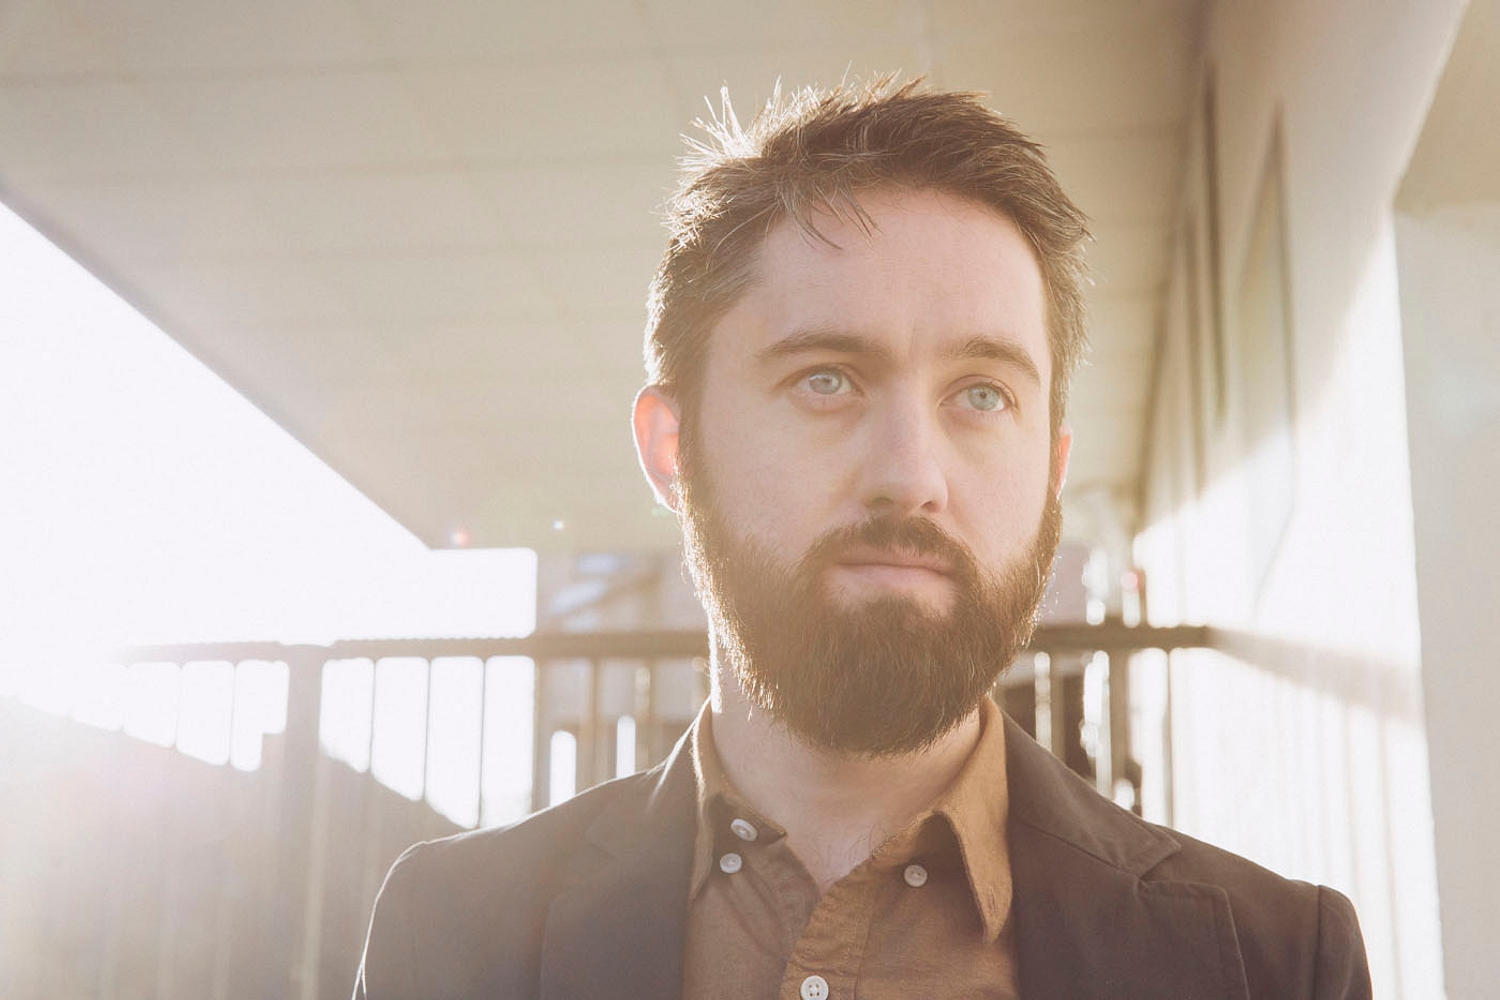 Villagers reveal video for ‘Hot Scary Summer’